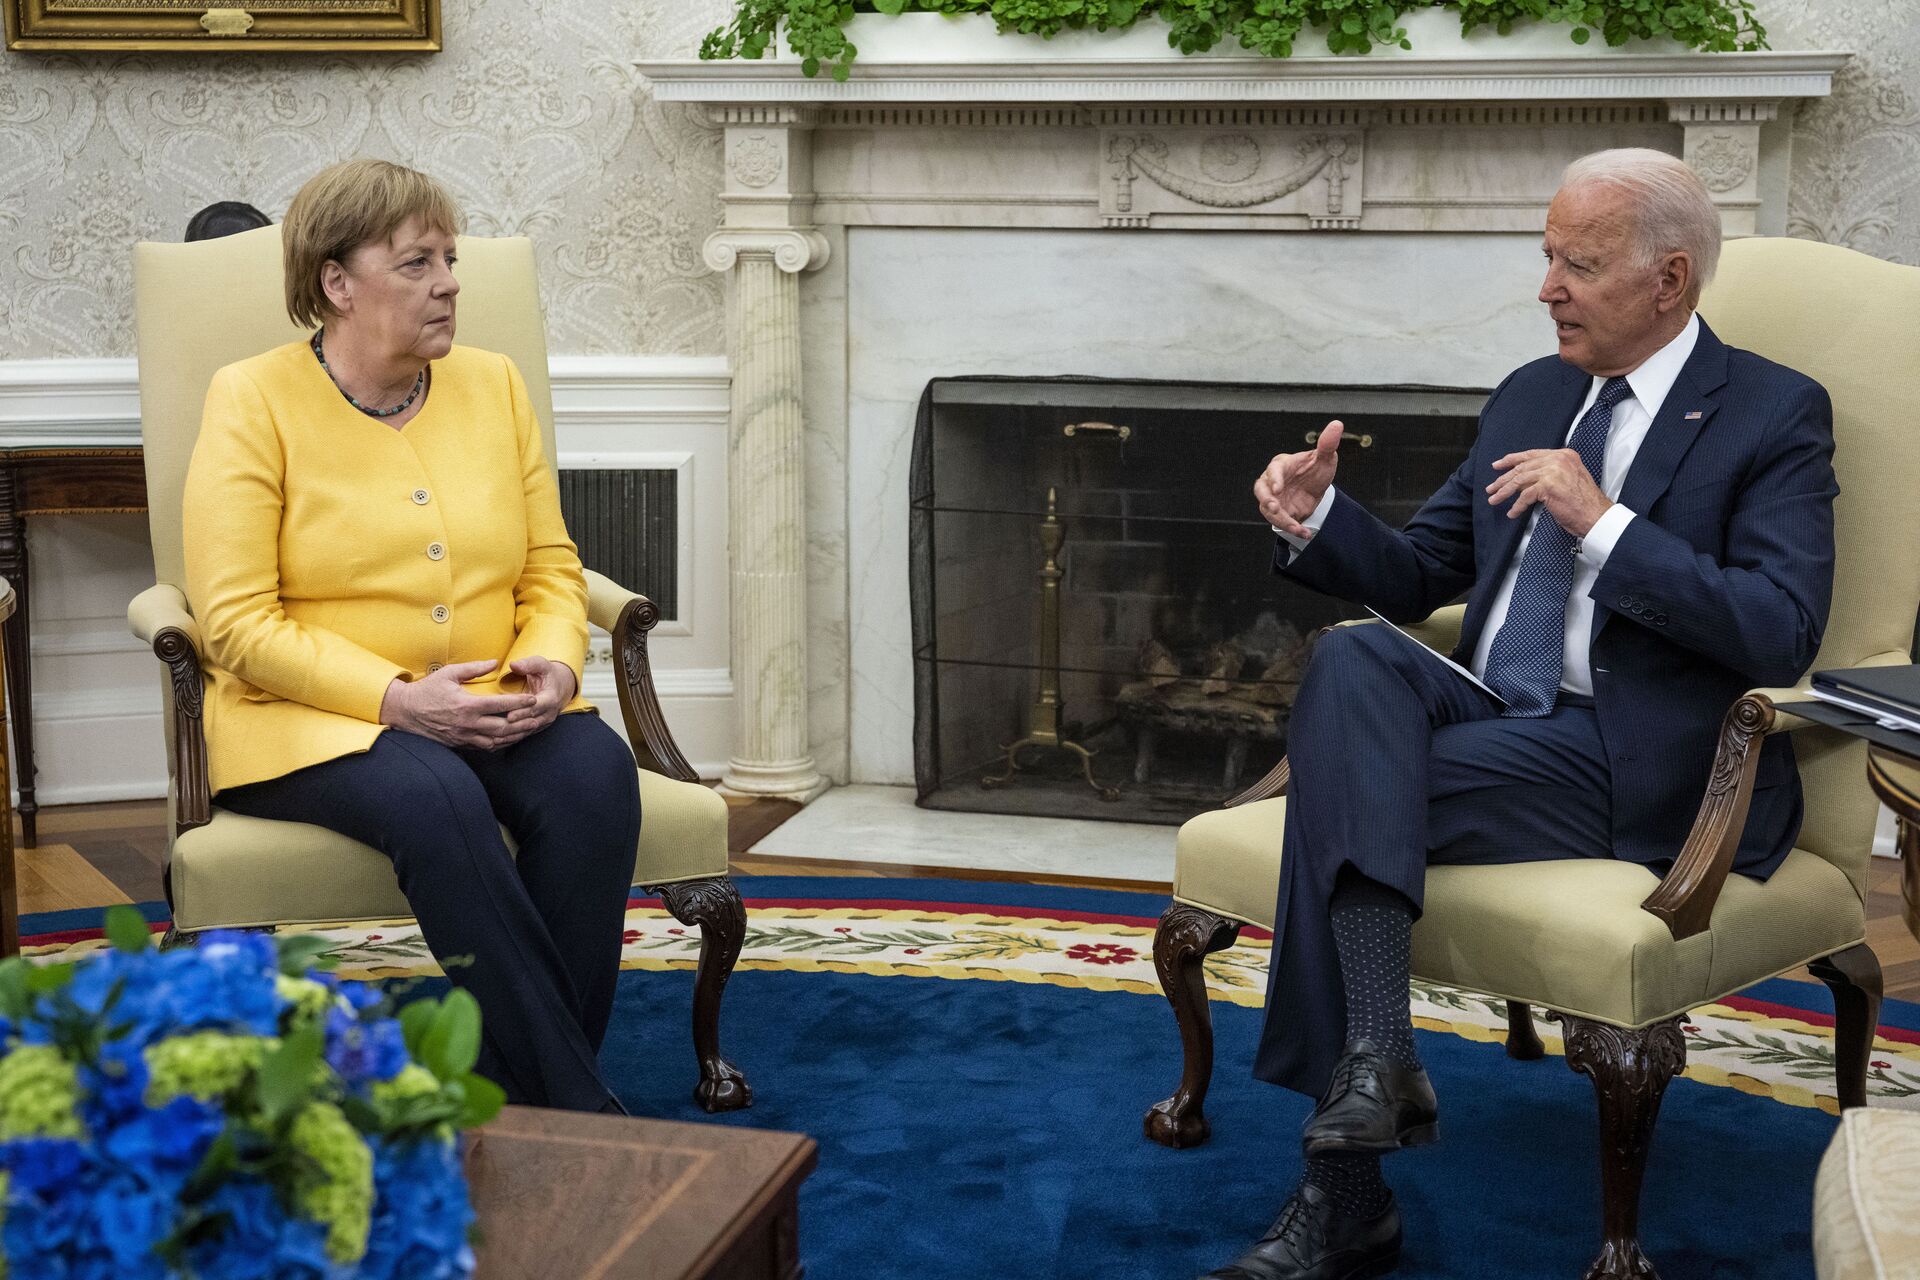 German Chancellor Angela Merkel (L) and U.S. President Joe Biden make brief remarks to the press before a meeting in the Oval Office at the White House on July 15, 2021 in Washington, DC. During what is likely her last official visit to Washington, the leaders are expected to discuss their shared priorities on climate change and defense; and Biden is expected to voice his concerns about the Nord Stream 2 Russian natural gas pipeline. - Sputnik International, 1920, 14.10.2022